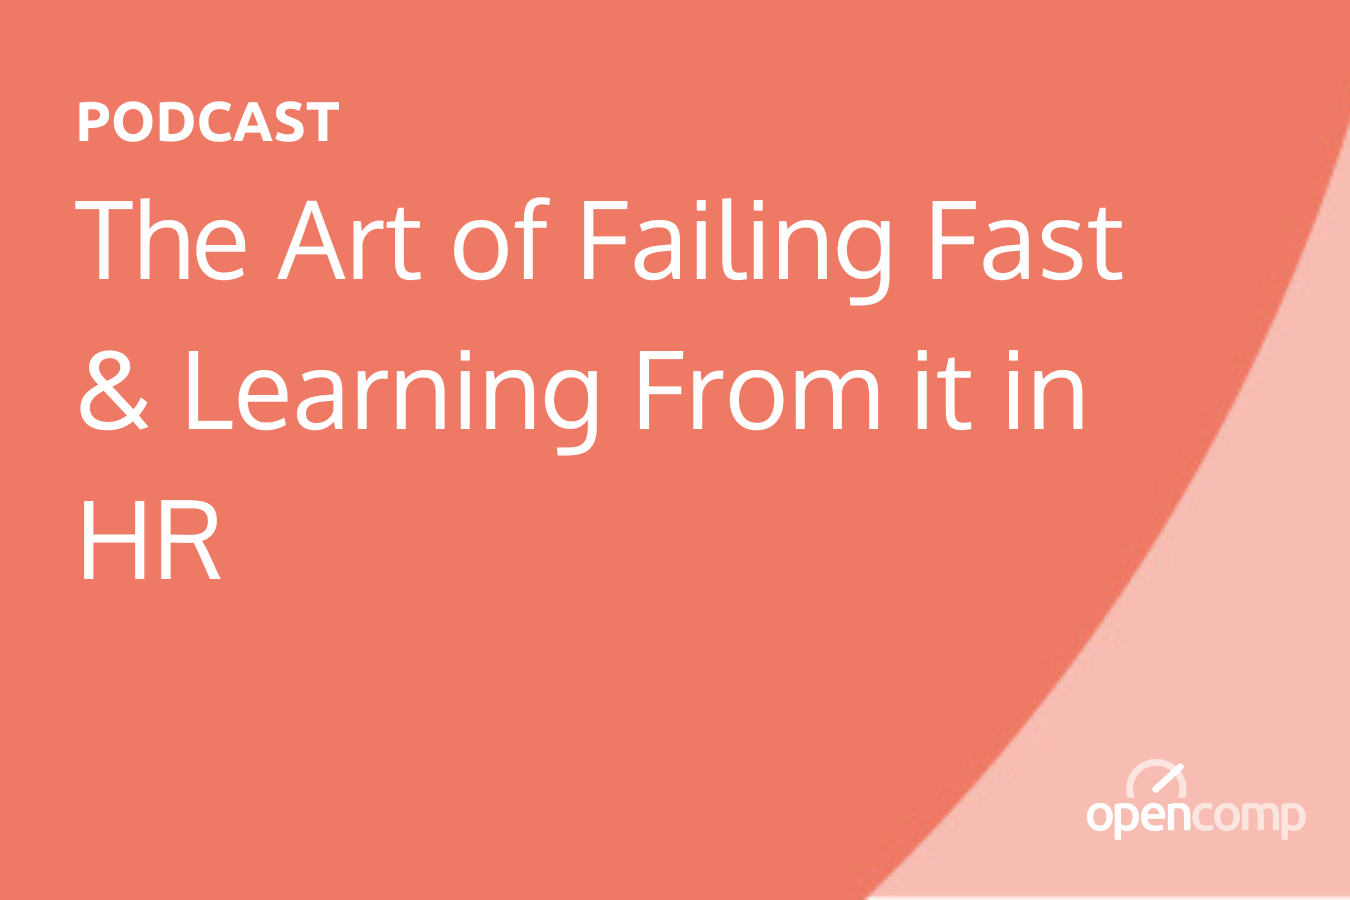 The Art of Failing Fast and Learning From it in HR